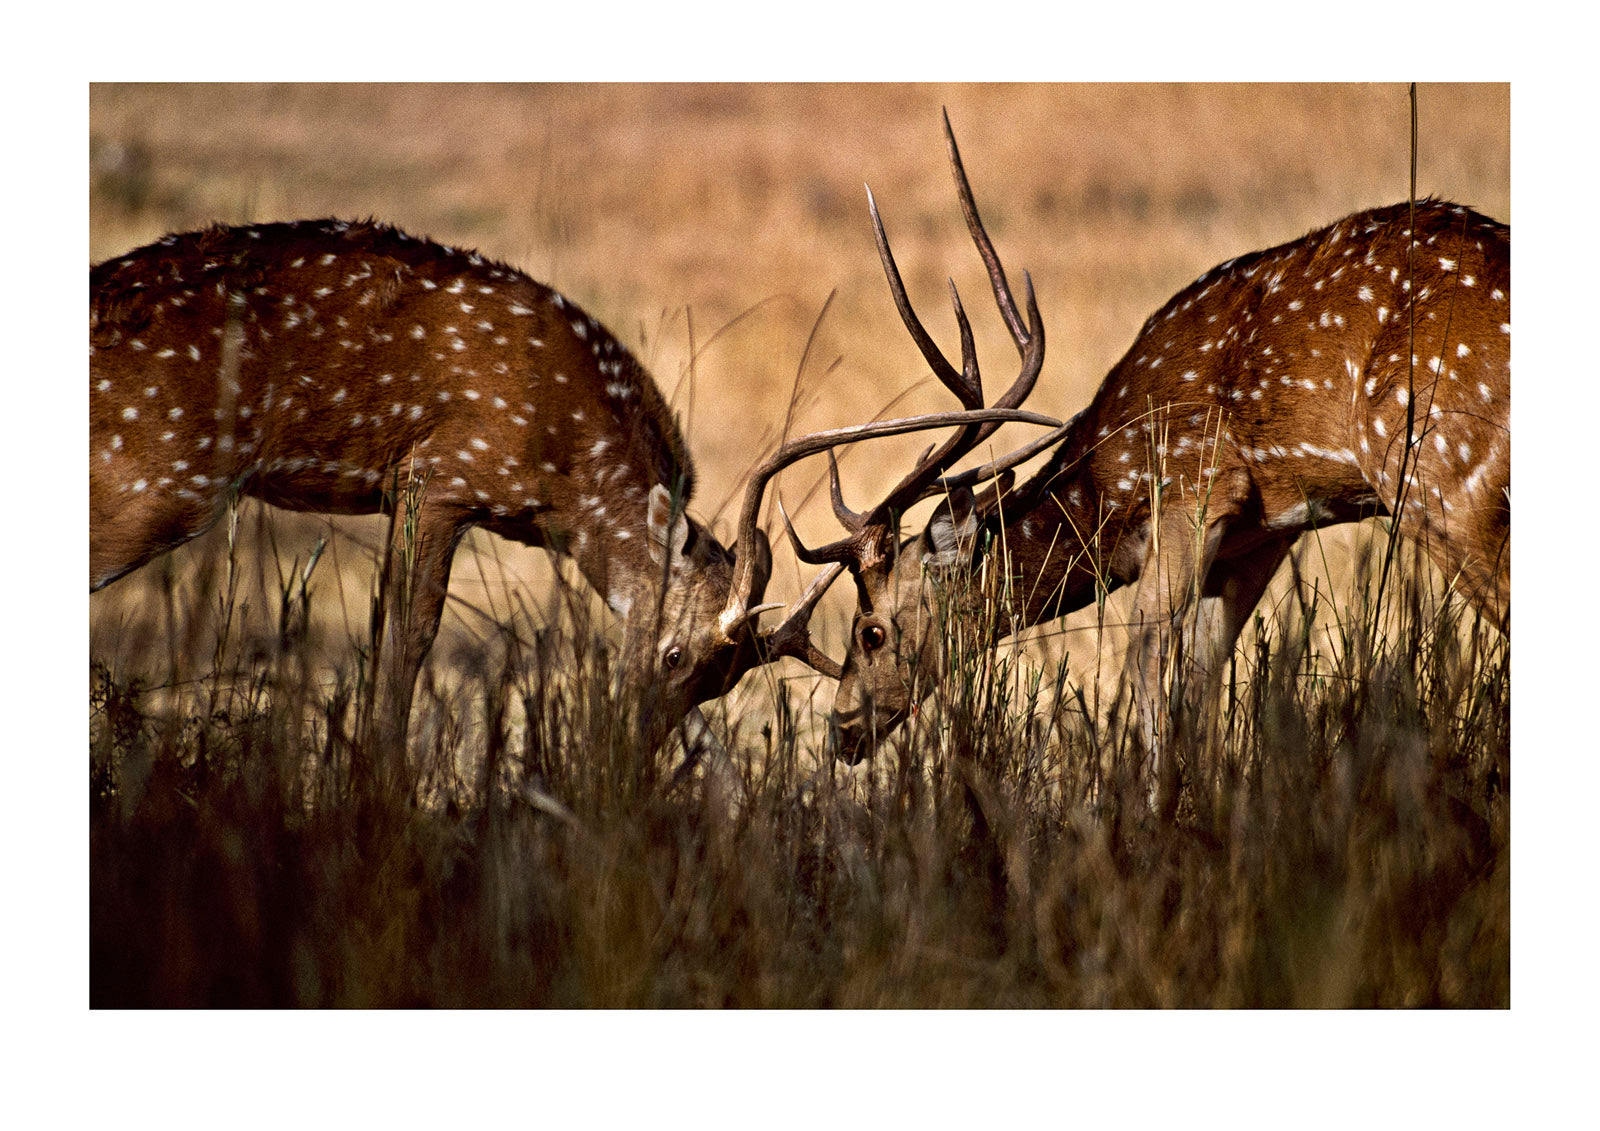 A pair of axis deer battle for territorial and mating rights. Ranthambhor National Park, India.